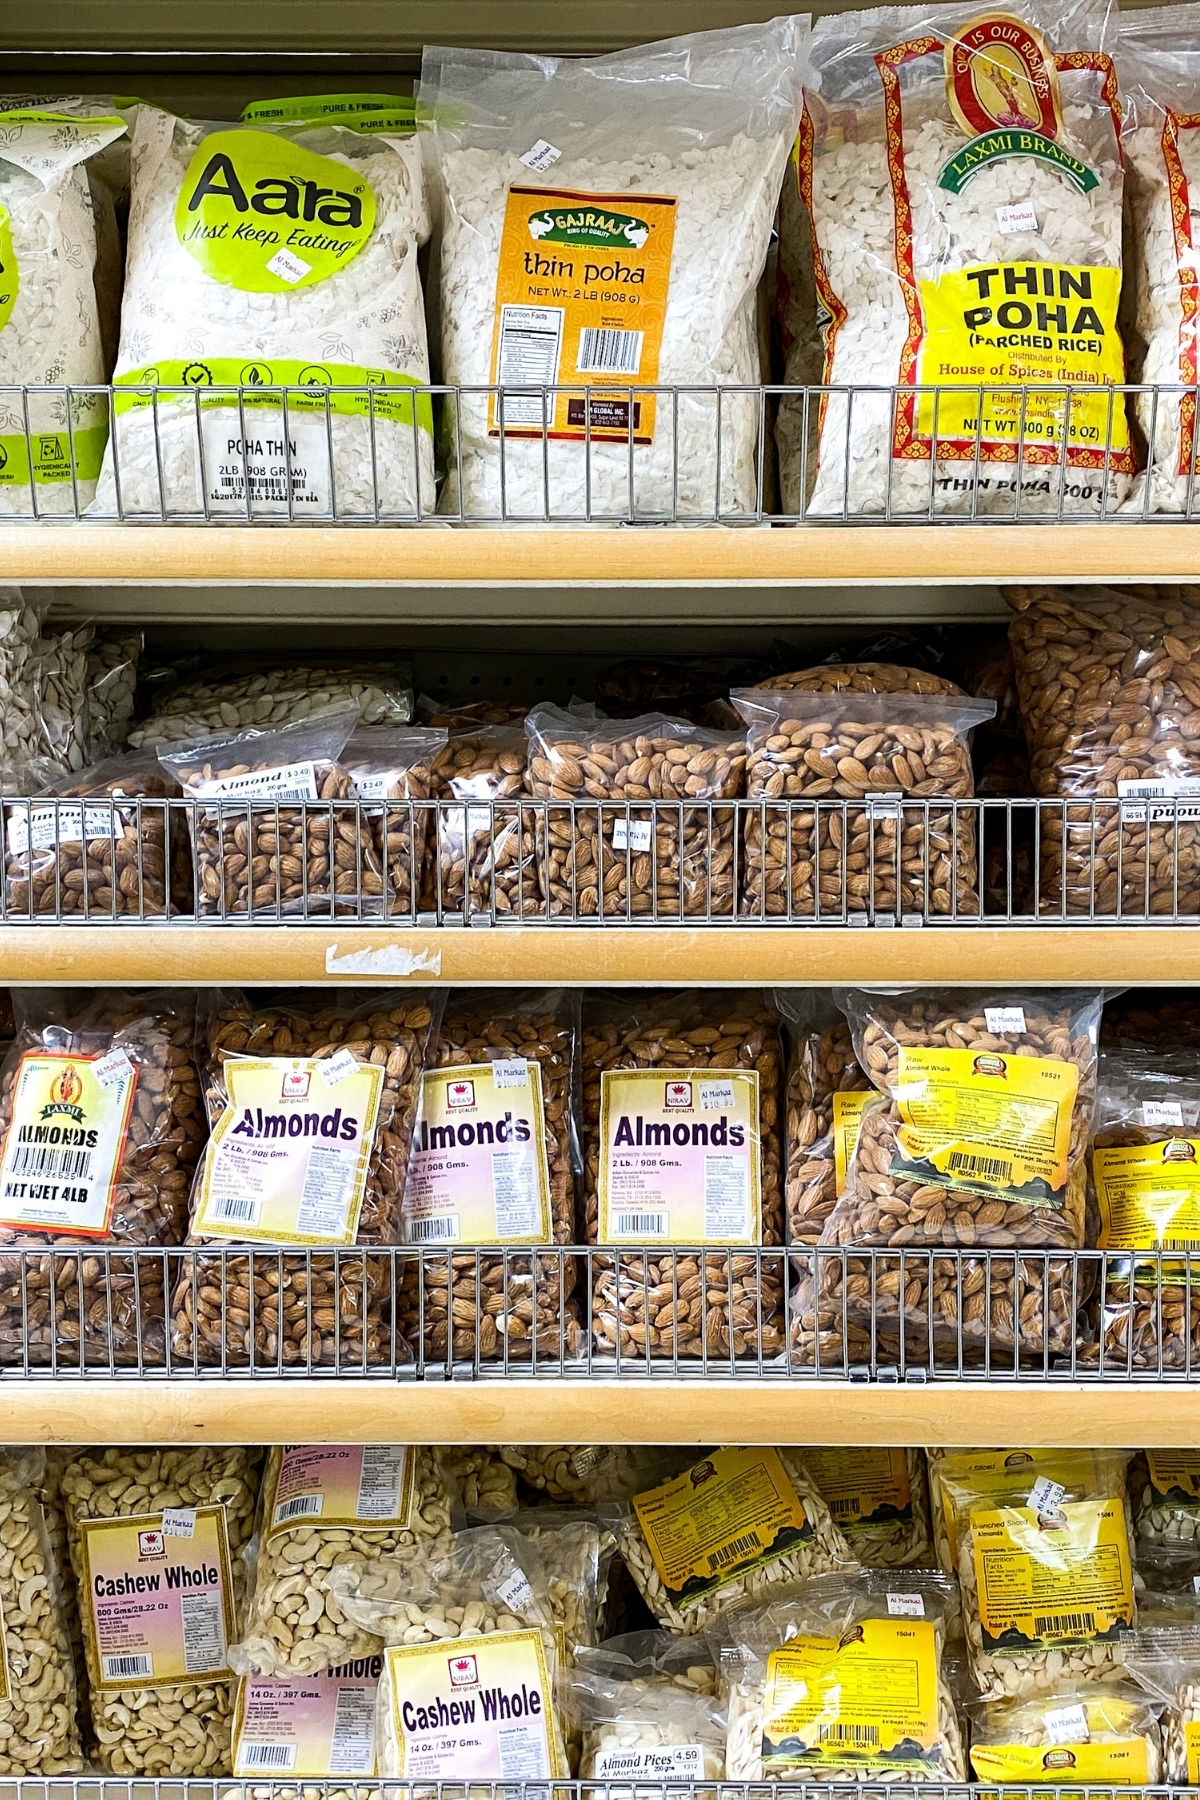 A grocery aisle with shelves of whole nuts